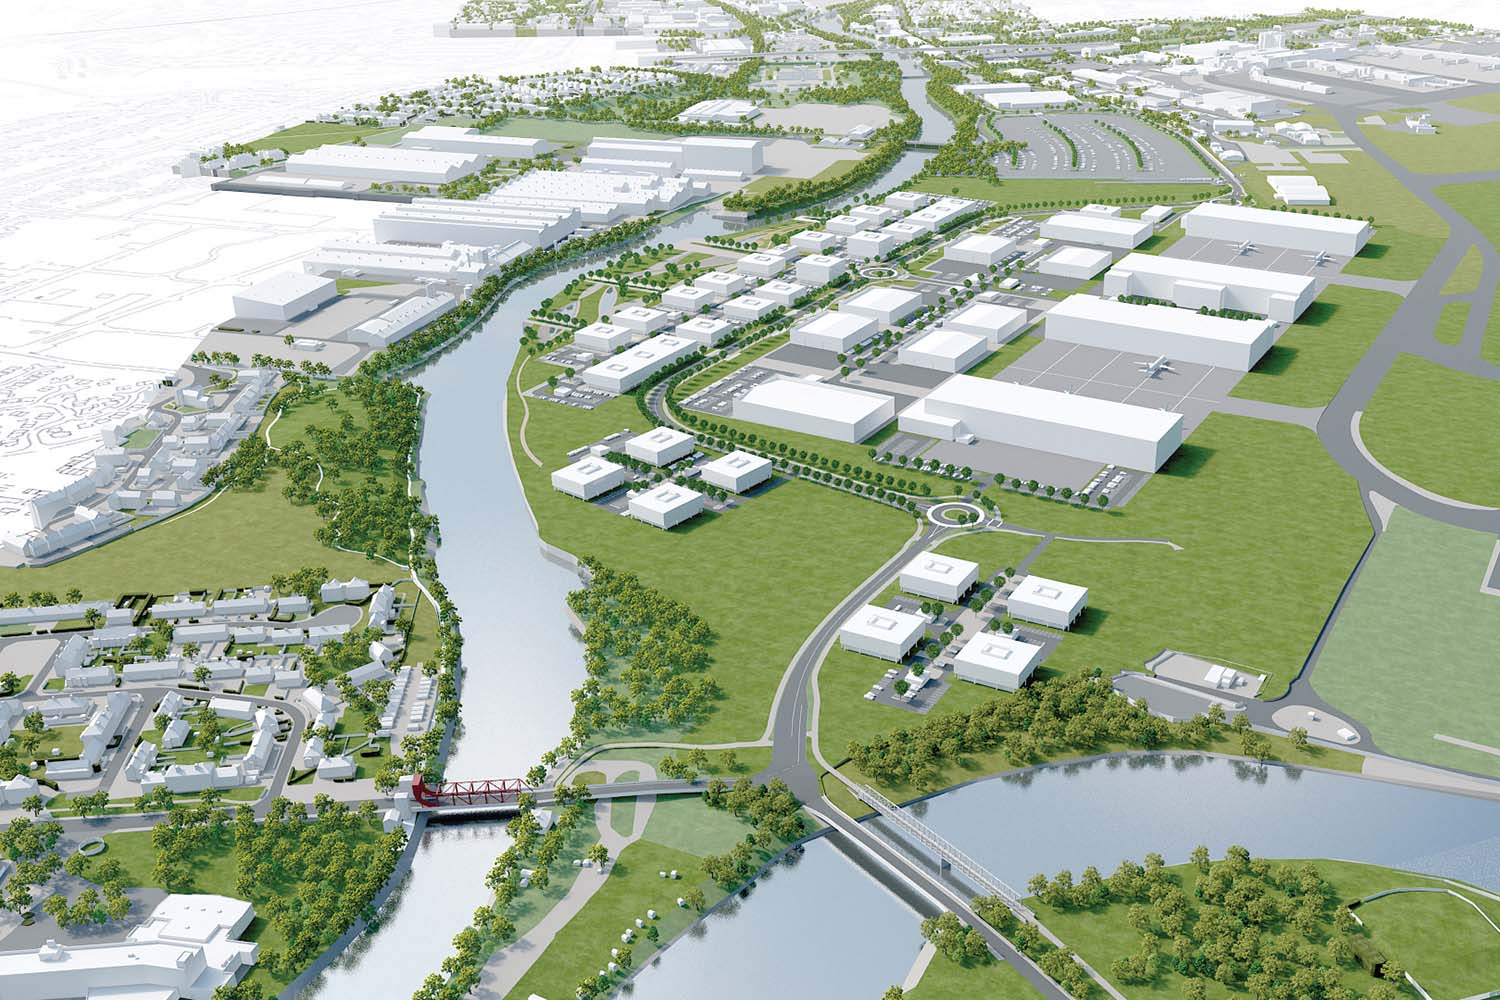 Artist impression of the Advanced Manufacturing Innovation District Scotland